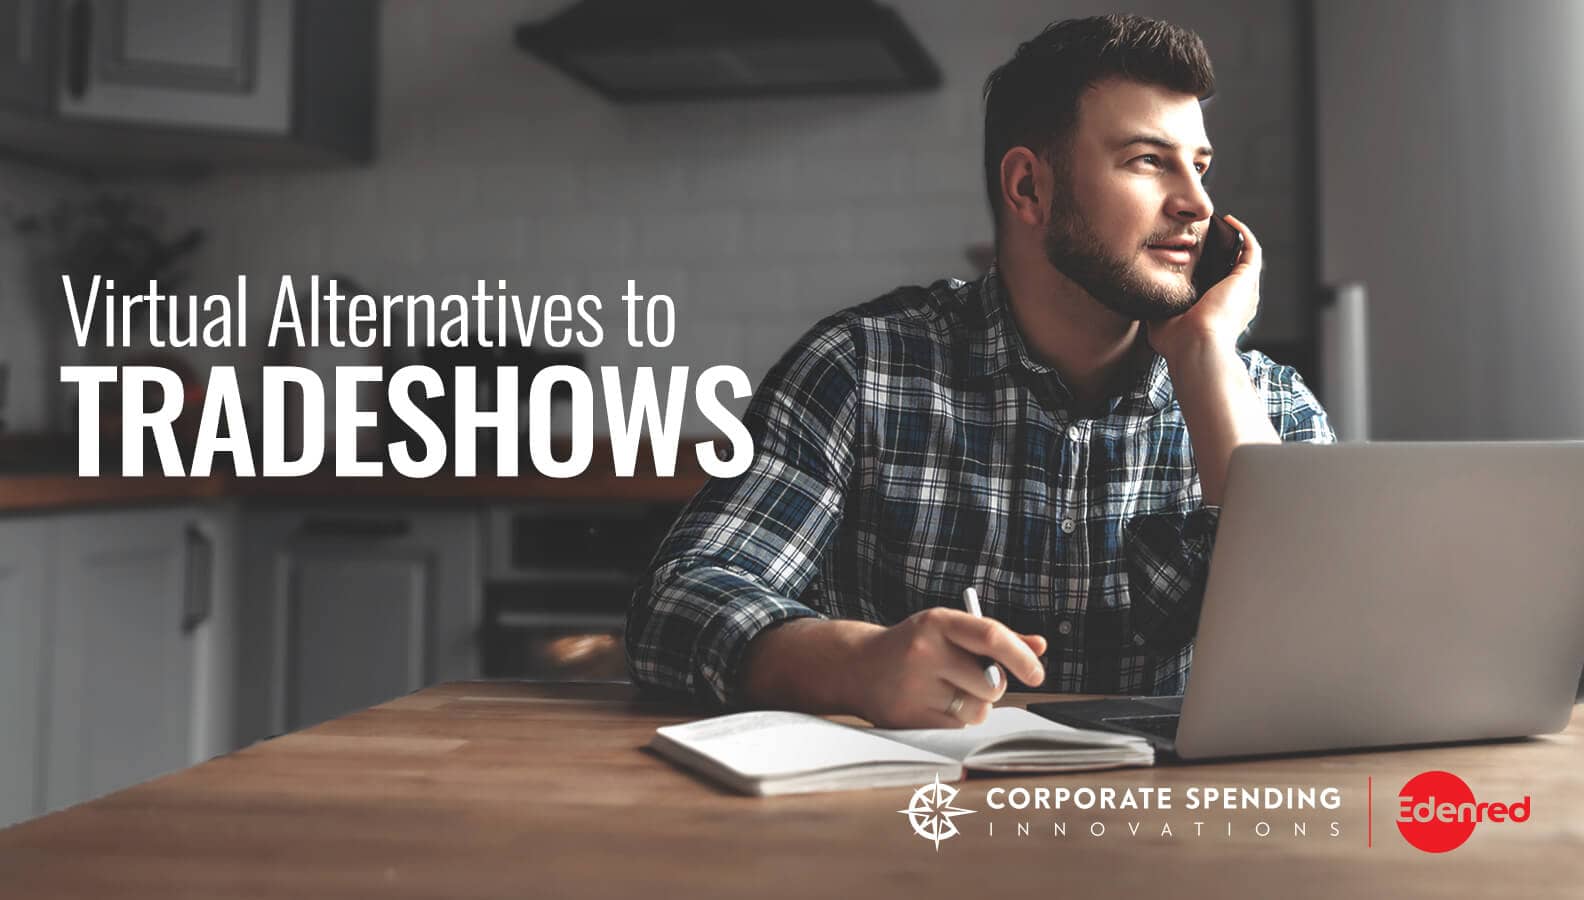 Corporate Distancing: Virtual Alternatives to Tradeshows